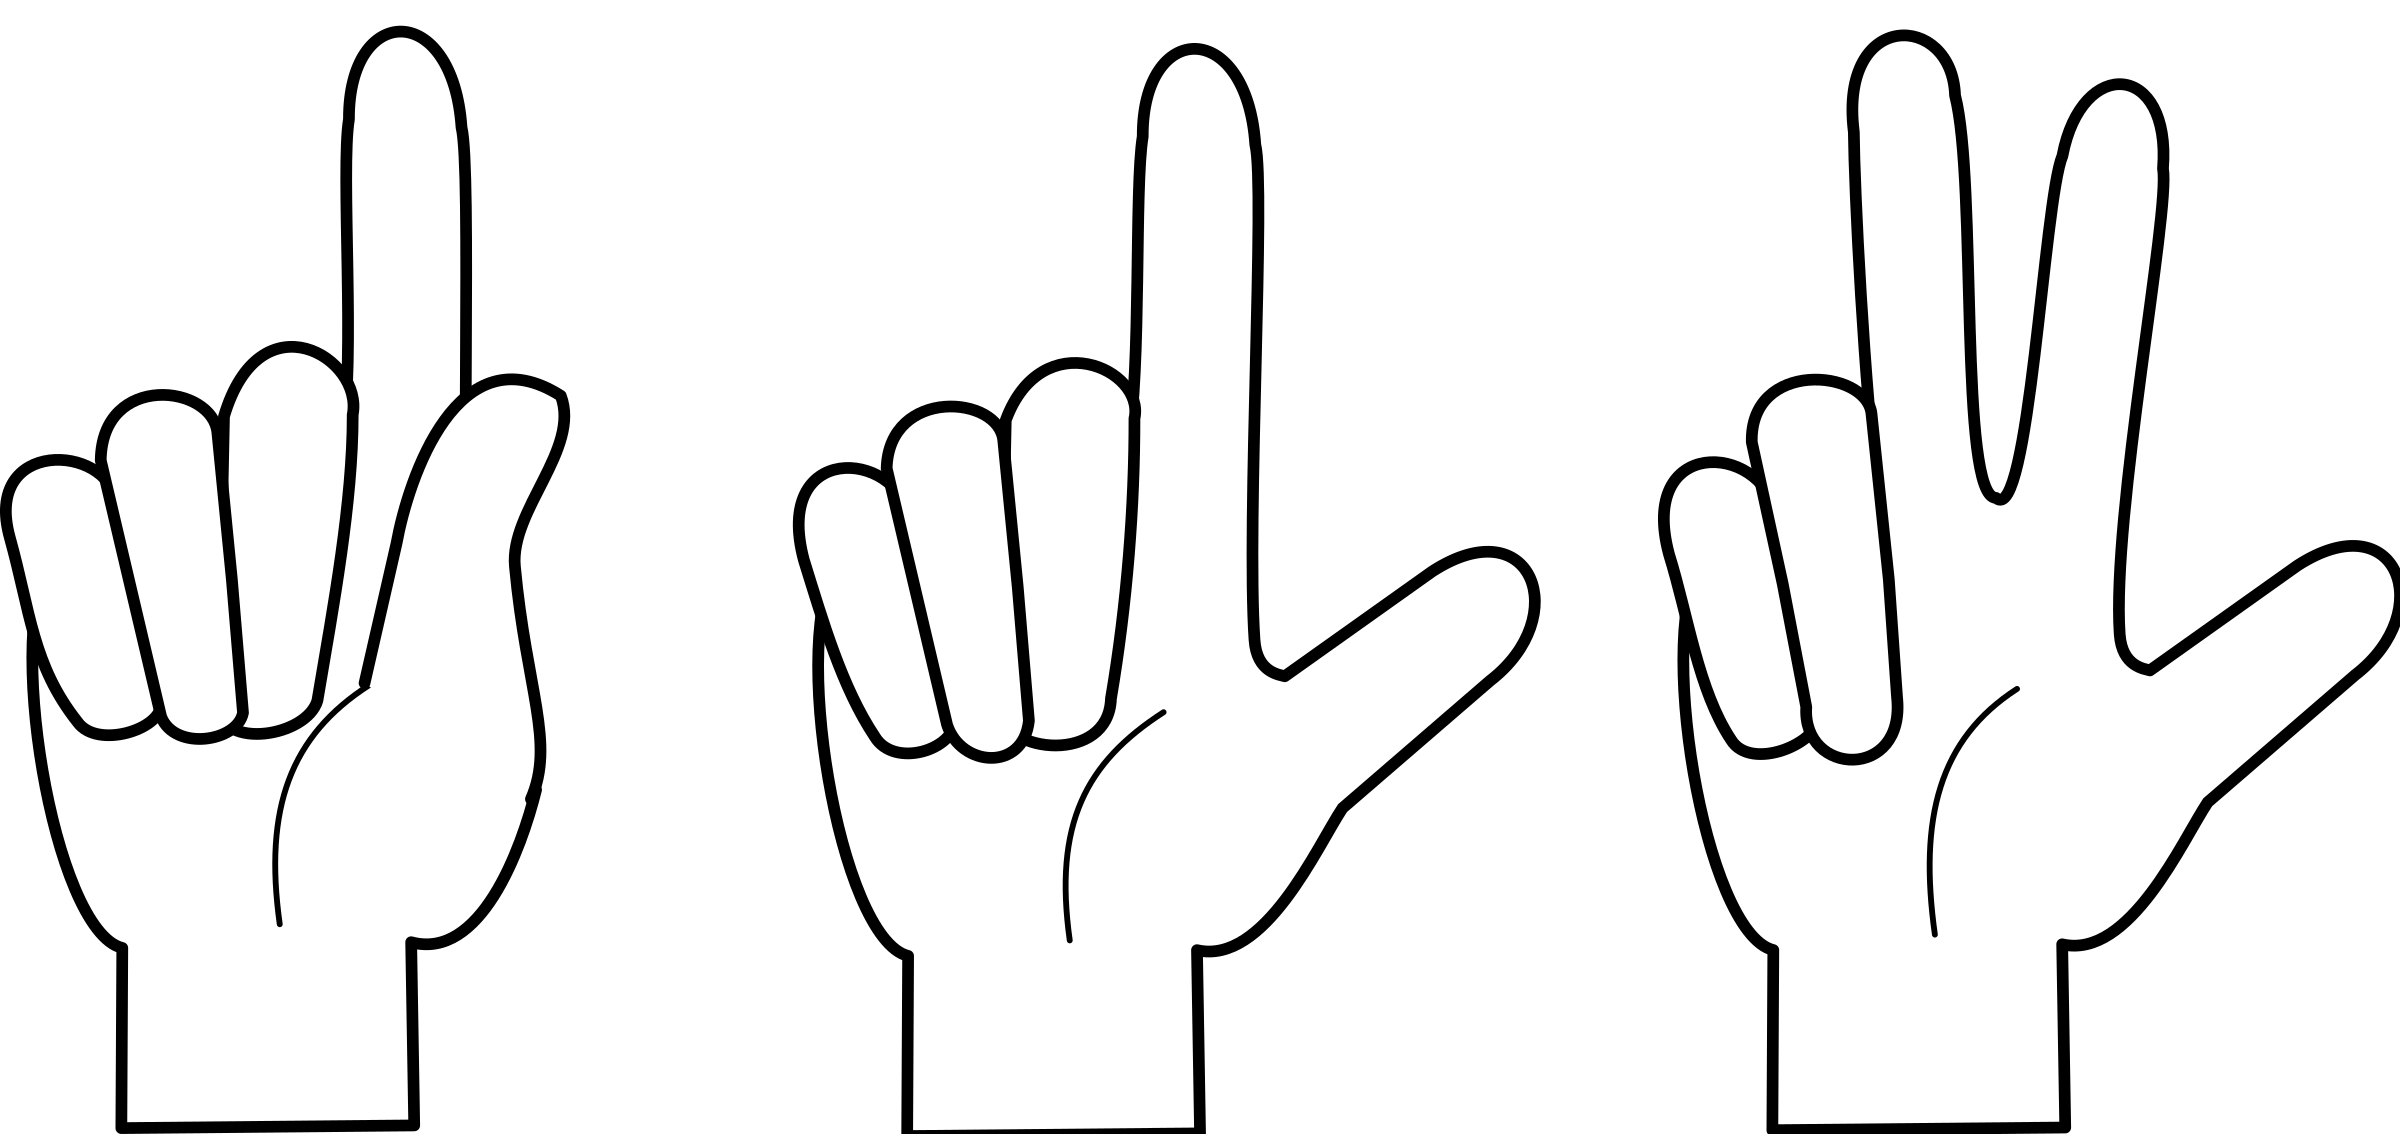 finger clipart two